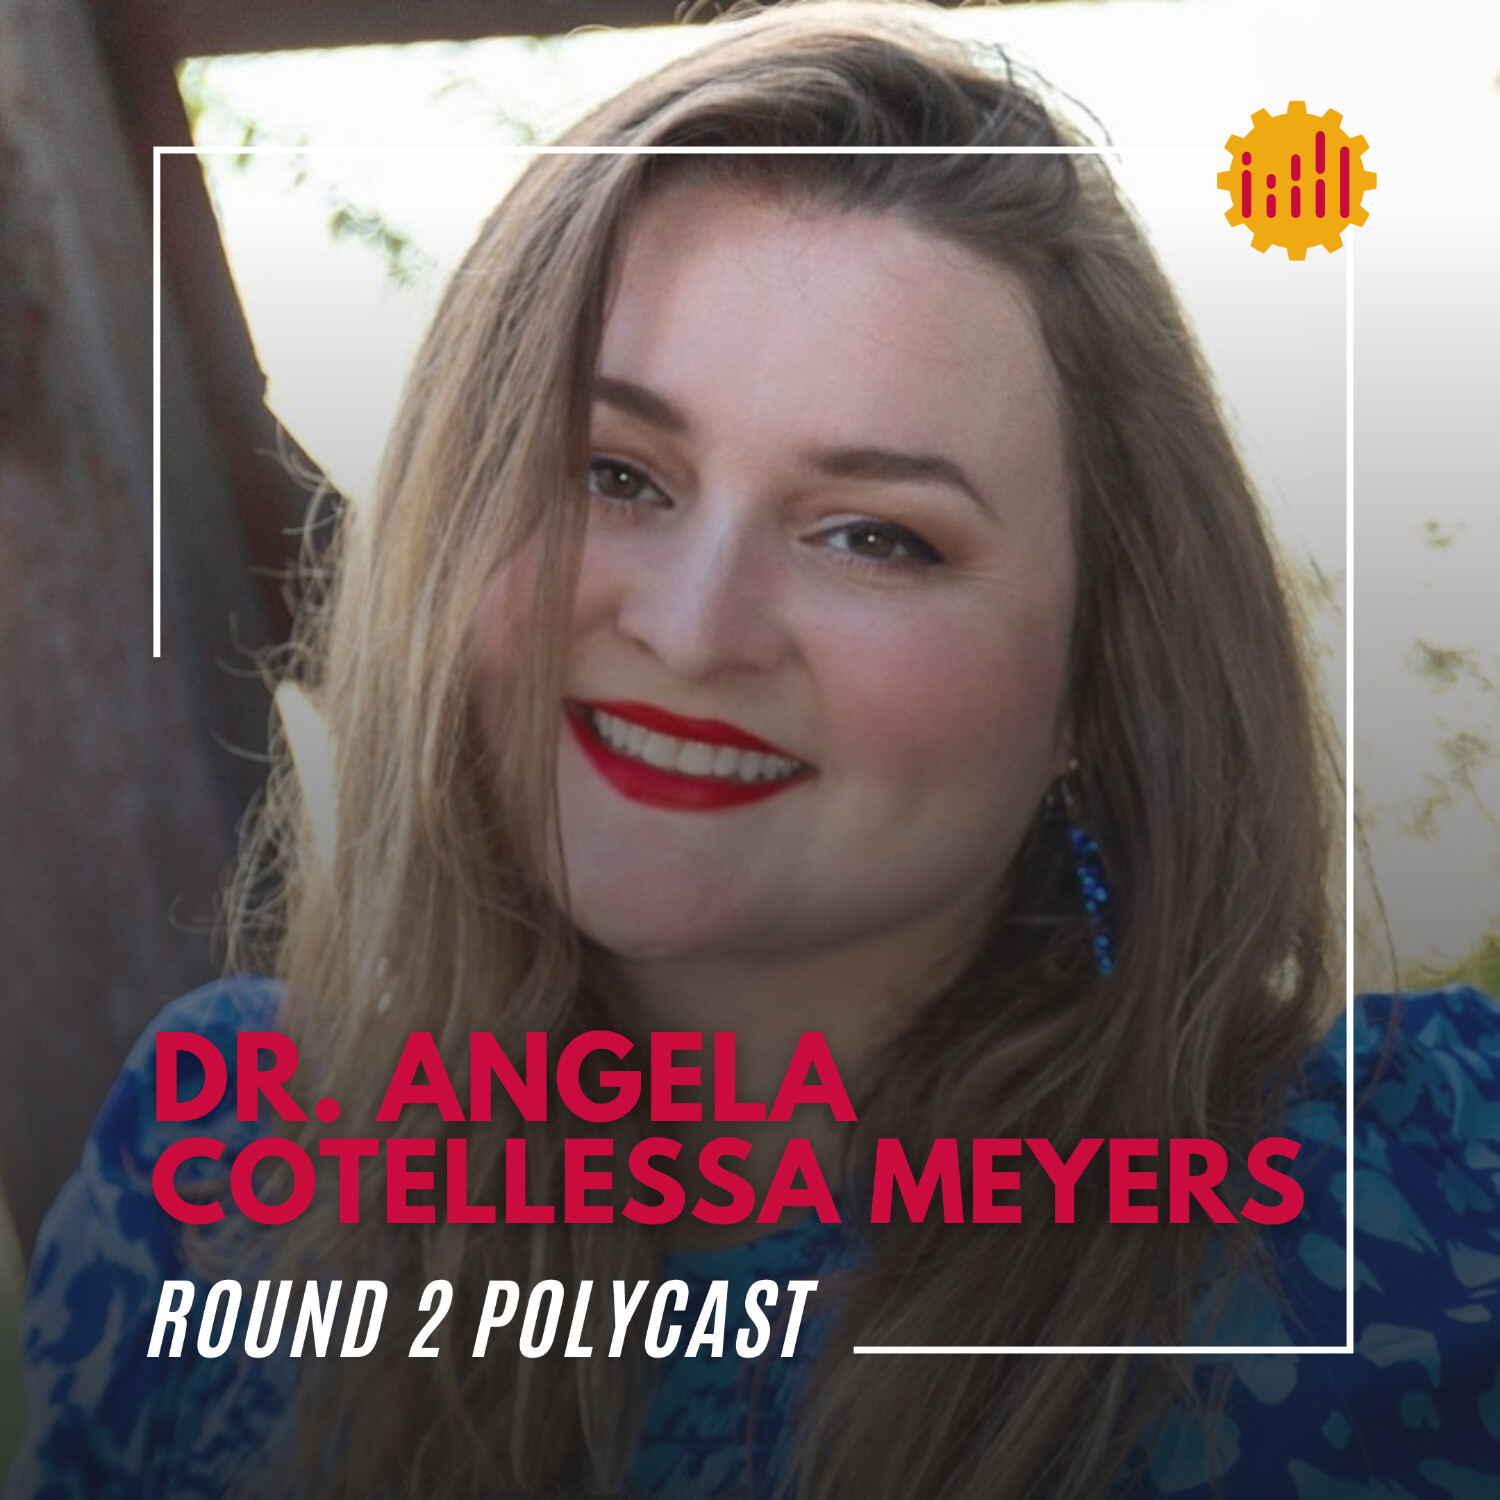 Embracing Polymathy: Dr. Angela Cotellessa’s Vision for Lifelong Learning and Global Innovation